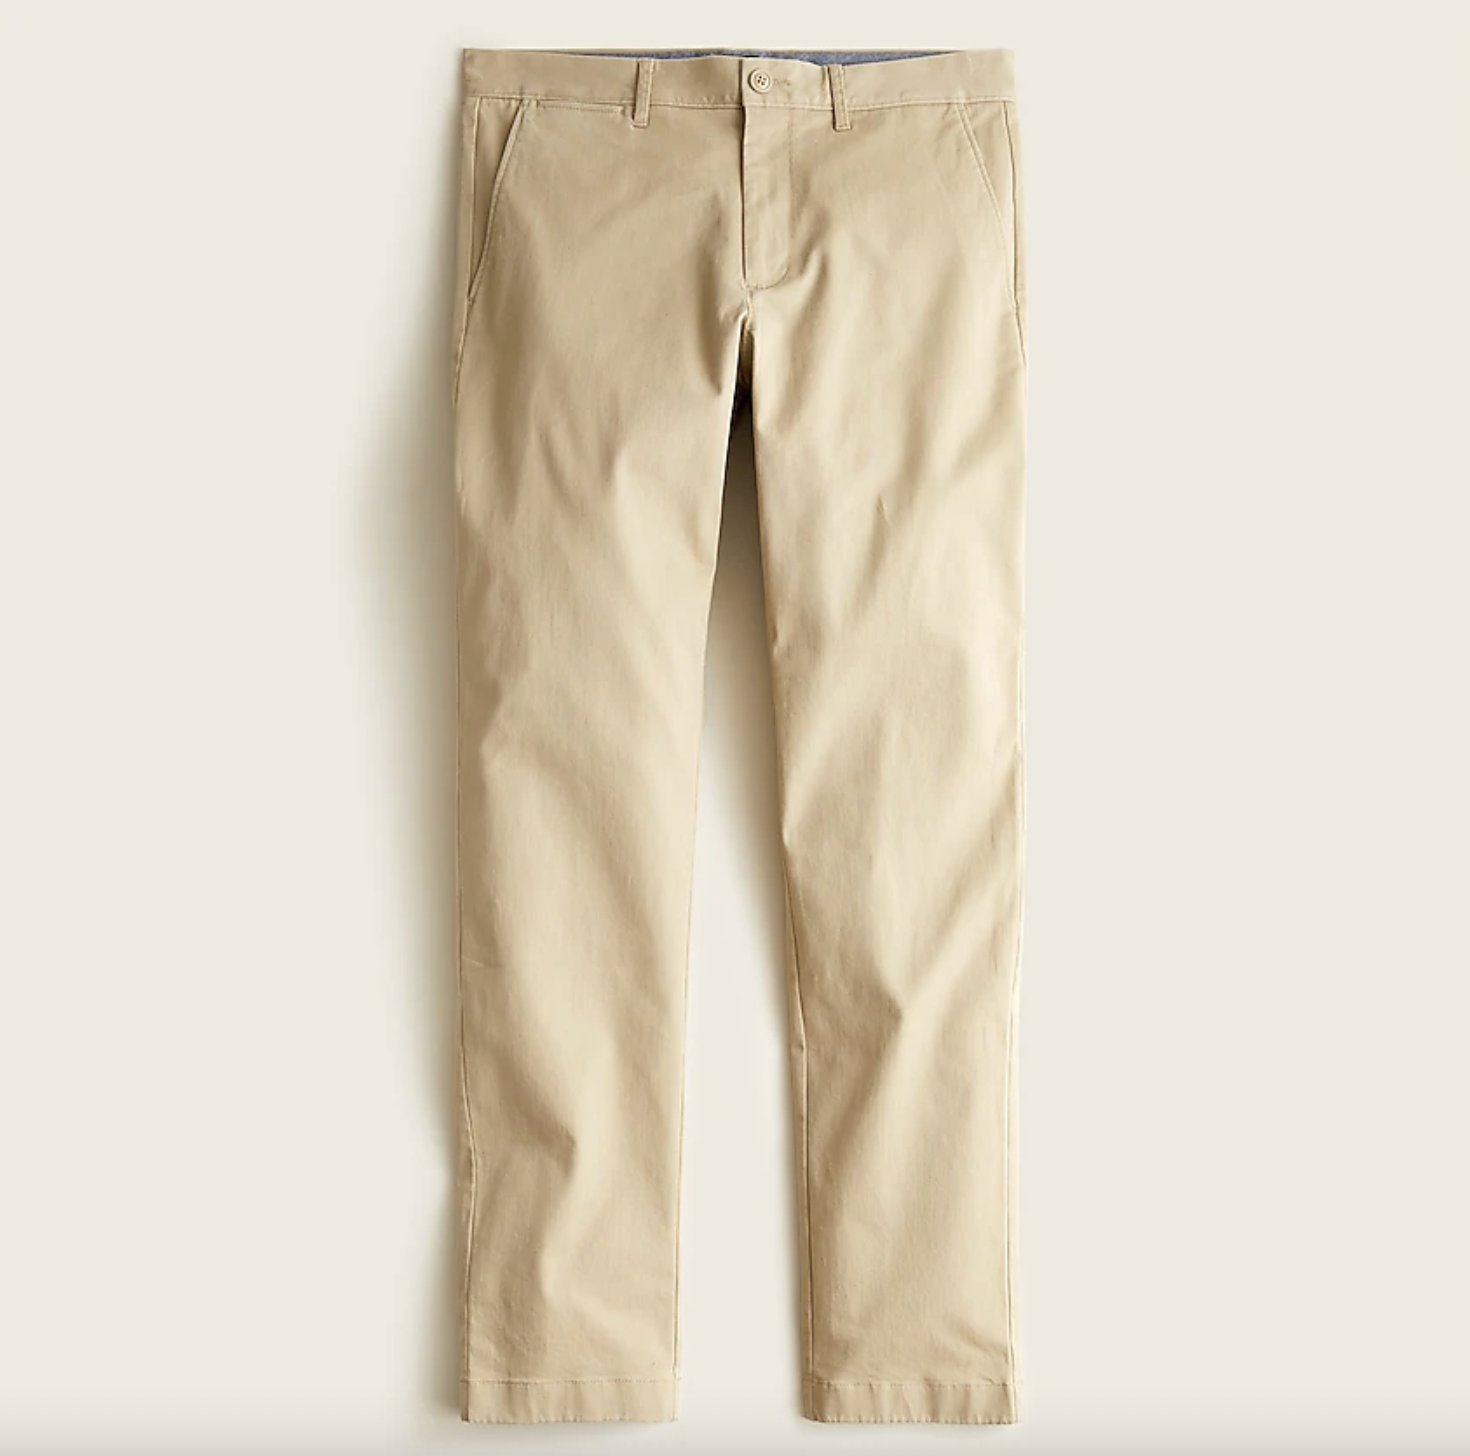 Should You Wear Sneakers with Khakis If So What Color Sneakers Works Best   ThreadCurve